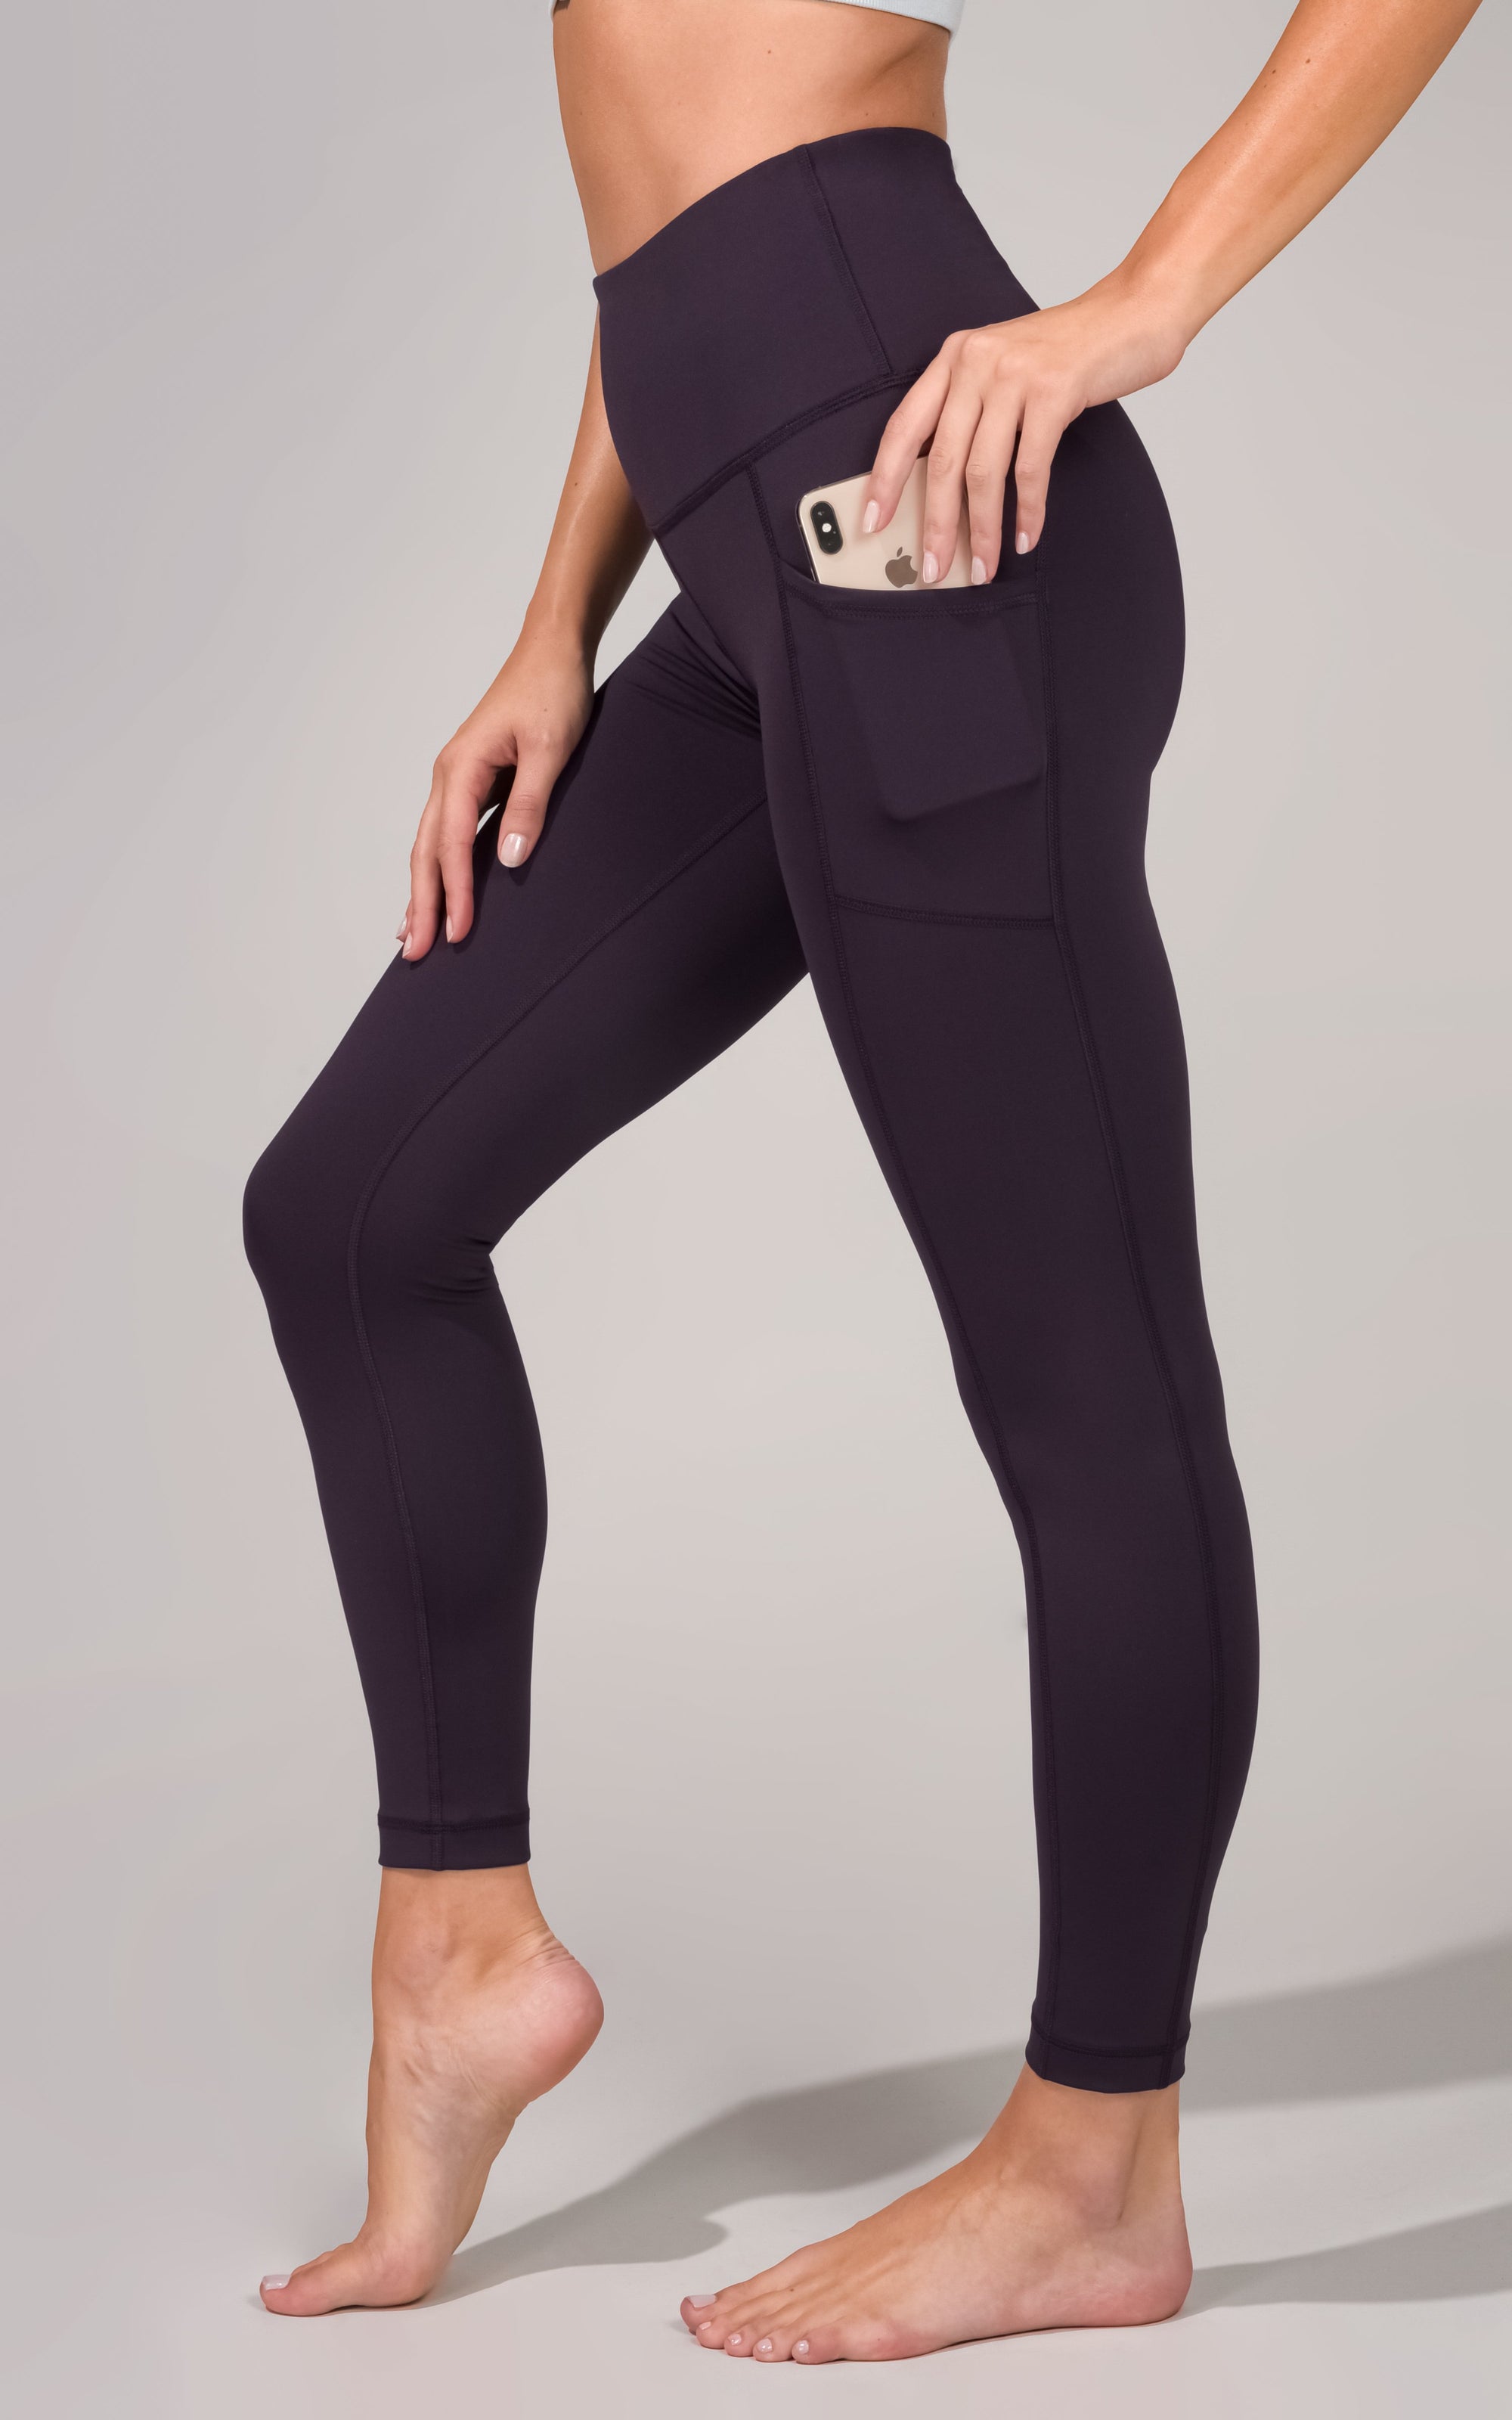  90 Degree By Reflex Squat Proof Super High Waist Odor Control  Ankle Length Leggings - Arctic Navy - Small : Clothing, Shoes & Jewelry